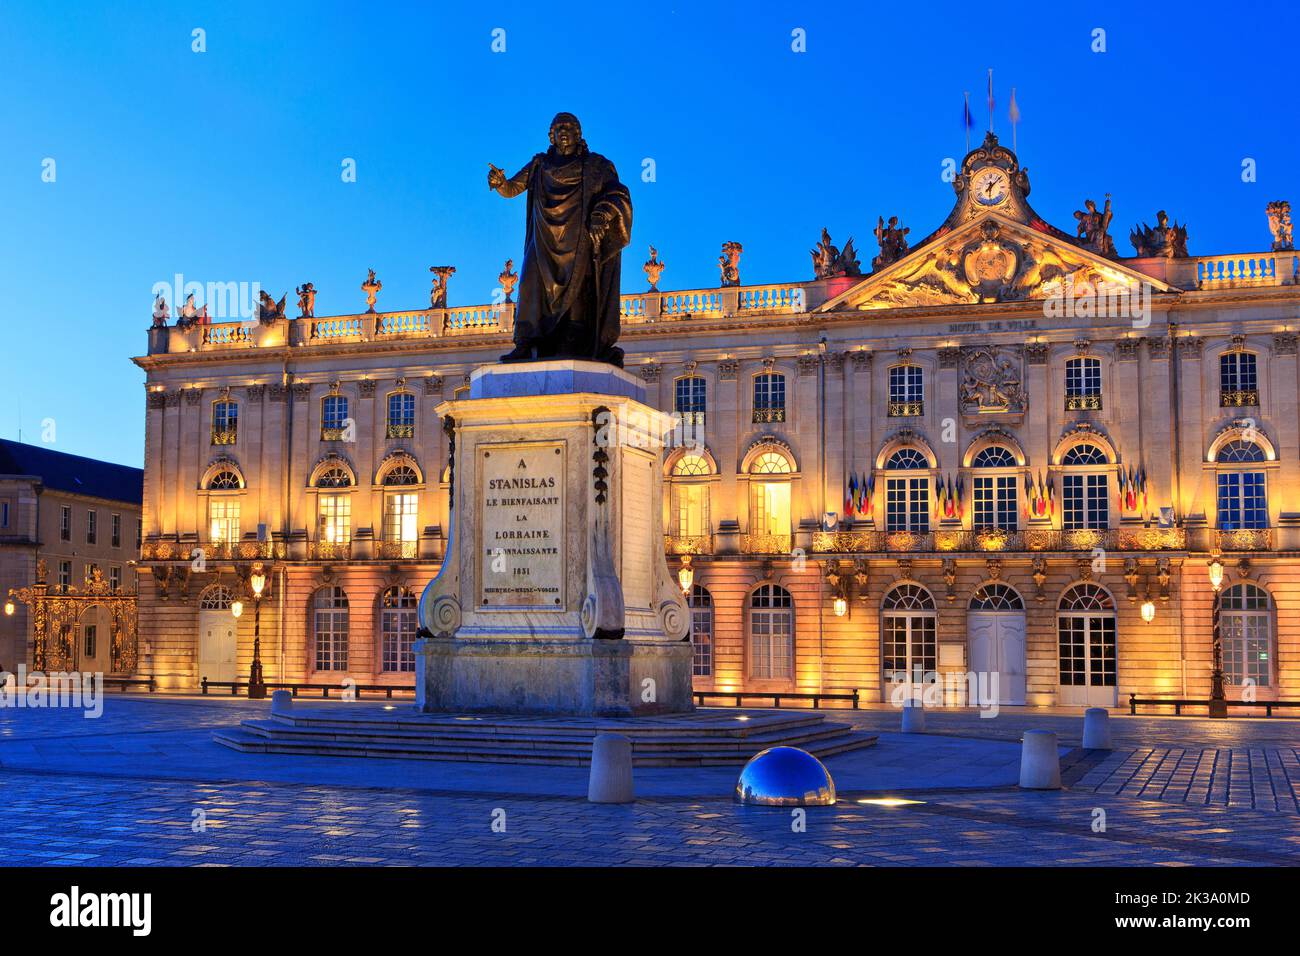 Statue of Stanislaus I, King of Poland and Grand Duke of Lithuania in front of the city hall at Place Stanislas in Nancy (Meurthe-et-Moselle), France Stock Photo